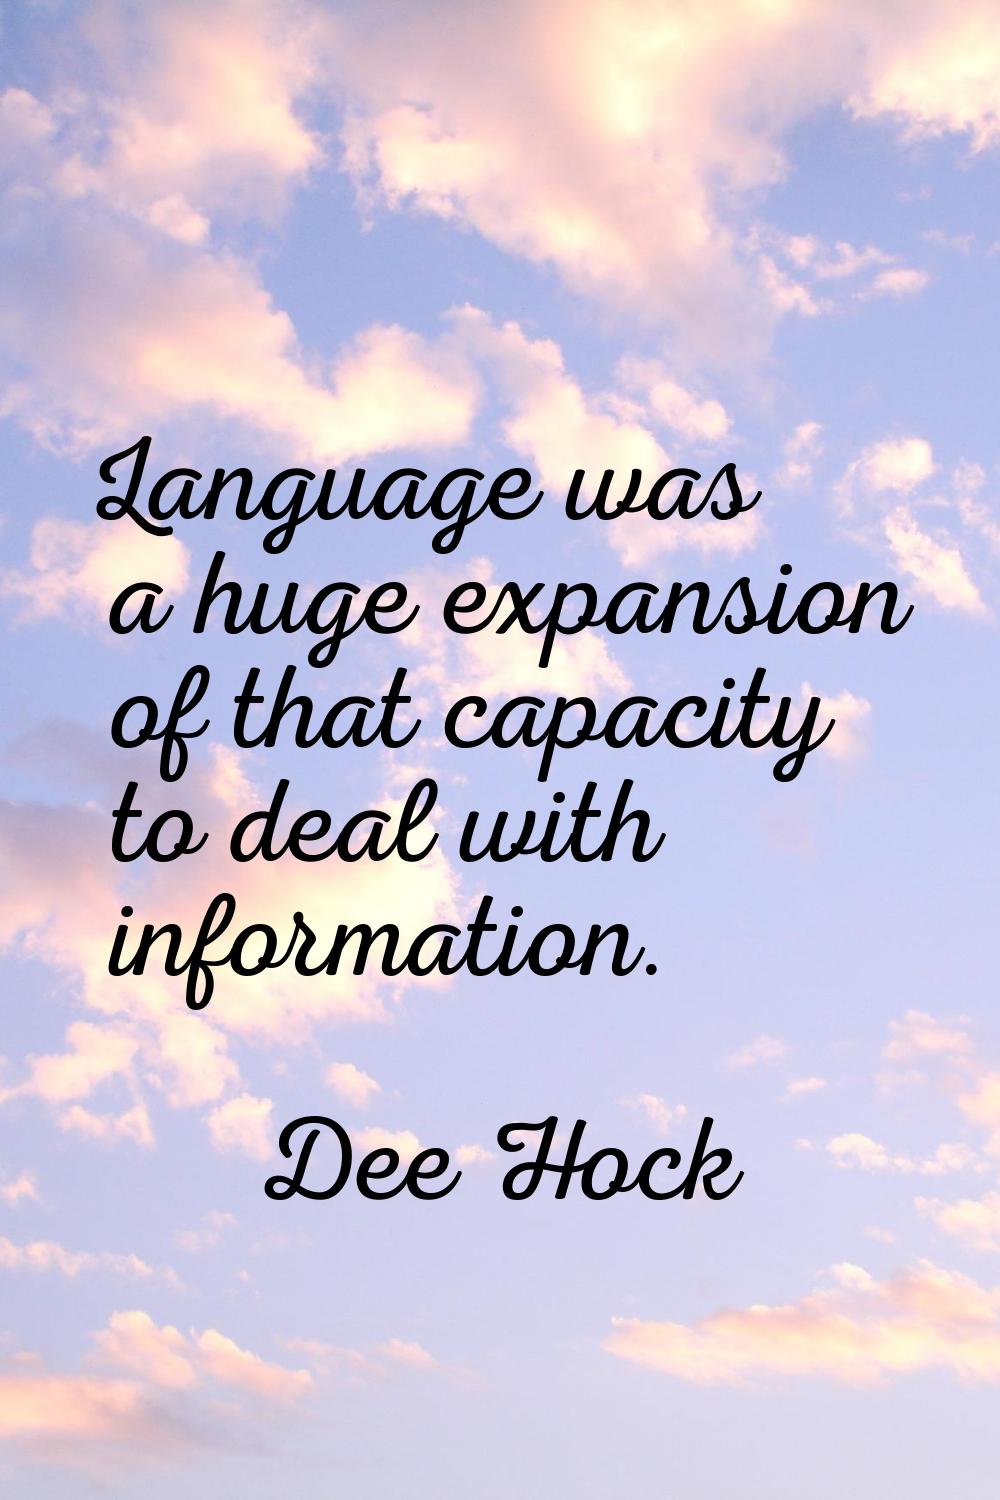 Language was a huge expansion of that capacity to deal with information.